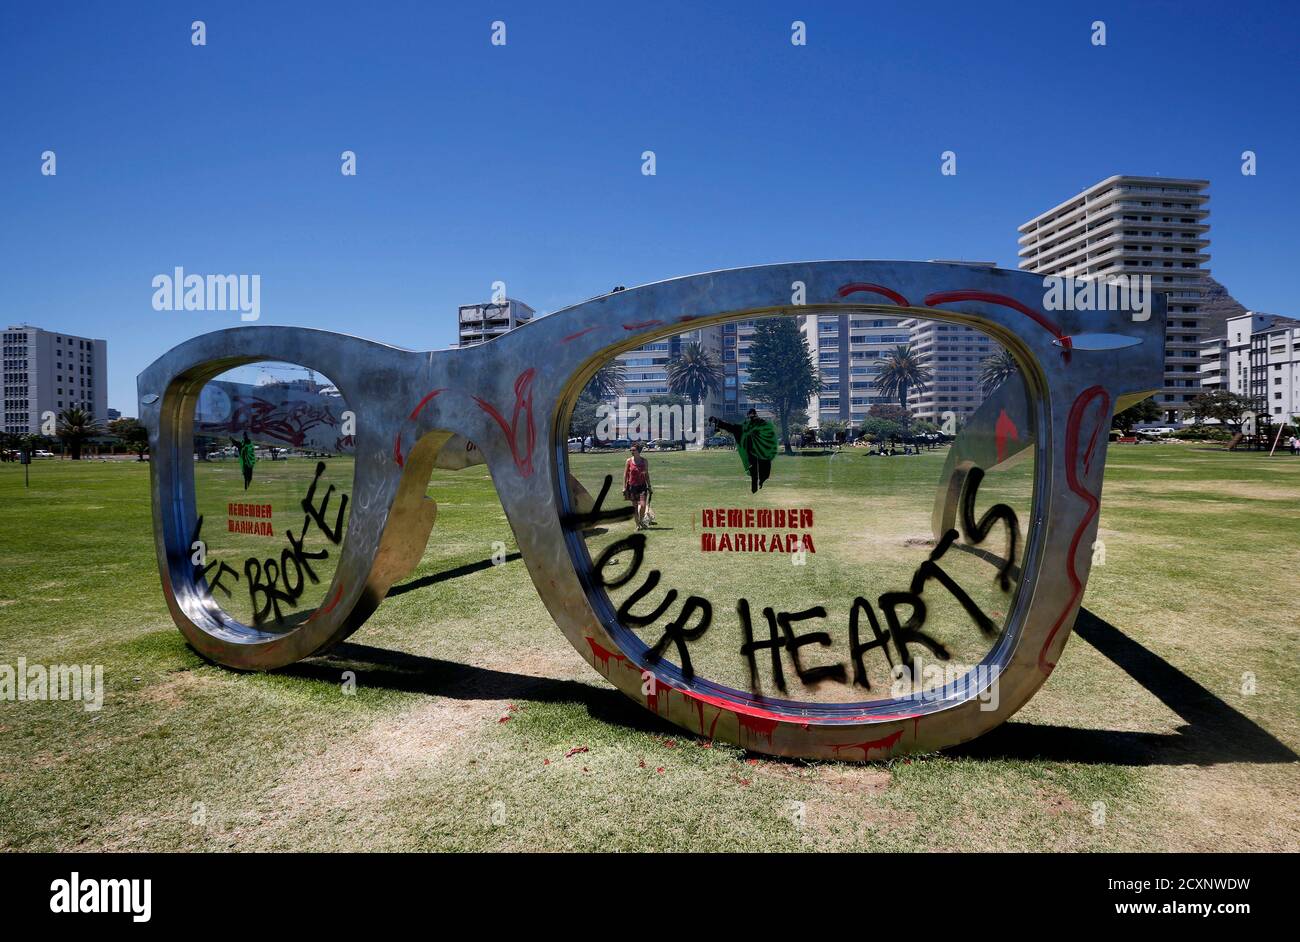 Graffiti covers a sculpture in the form of a giant pair of spectacles on Cape Town's Sea Point Promenade, November 18, 2014.  Inspired by Nelson Mandela, the work  'Perceiving Freedom' by artist Michael Elion has stirred some controversy in the local media. While popular with visitors to the promenade, some critics have questioned the association of Mandela's legacy with commercial sponsors.  REUTERS/Mike Hutchings (SOUTH AFRICA - Tags: SOCIETY) Stock Photo